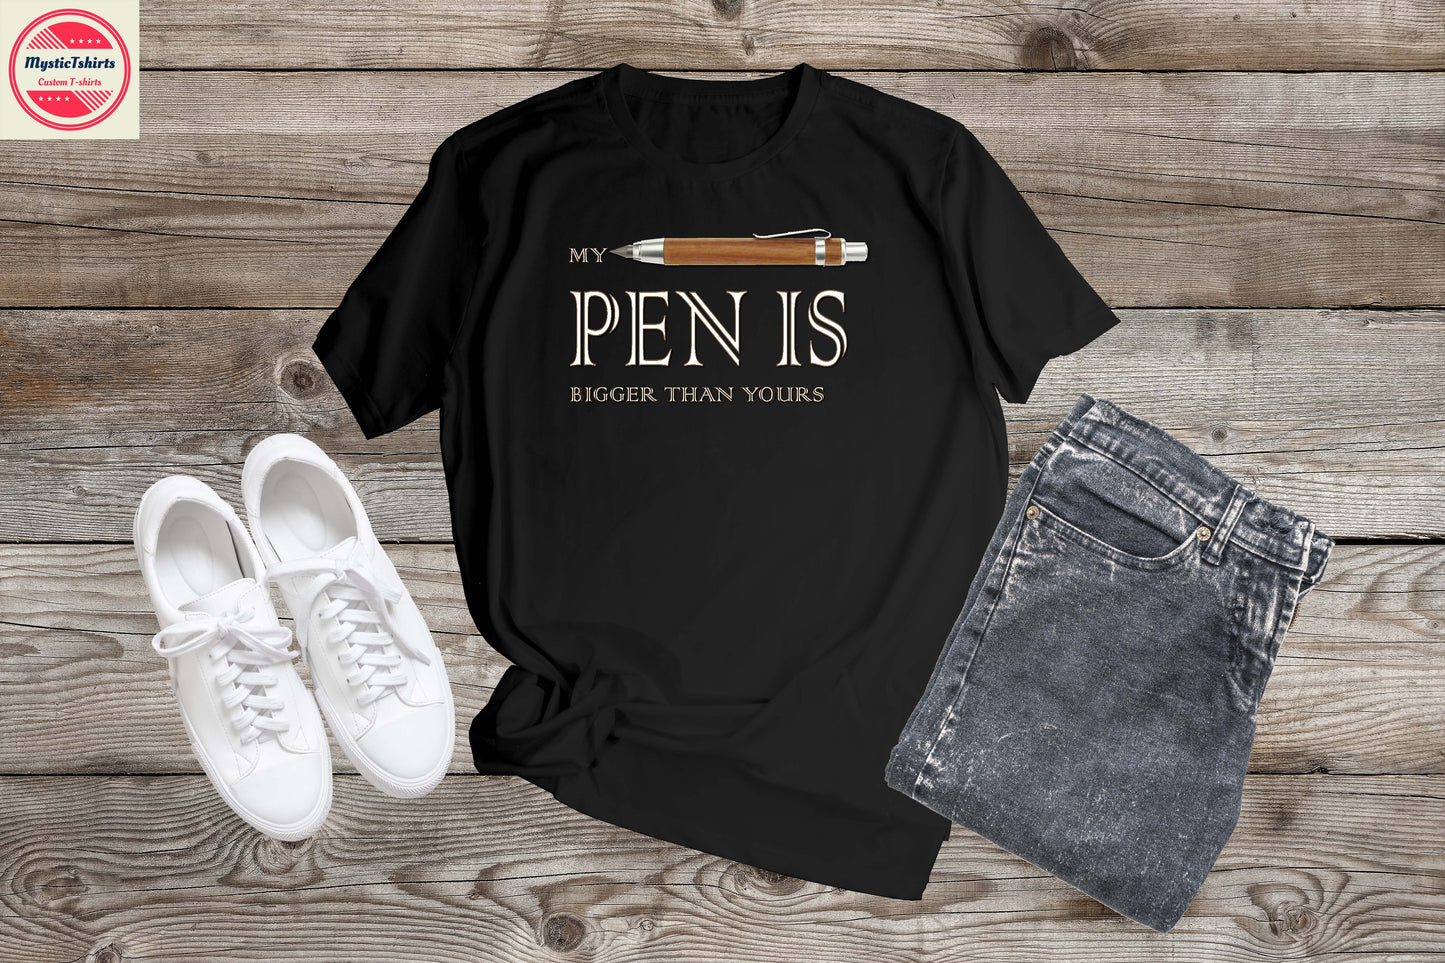 377. MY PEN IS BIGGER THAN YOURS, Custom Made Shirt, Personalized T-Shirt, Custom Text, Make Your Own Shirt, Custom Tee